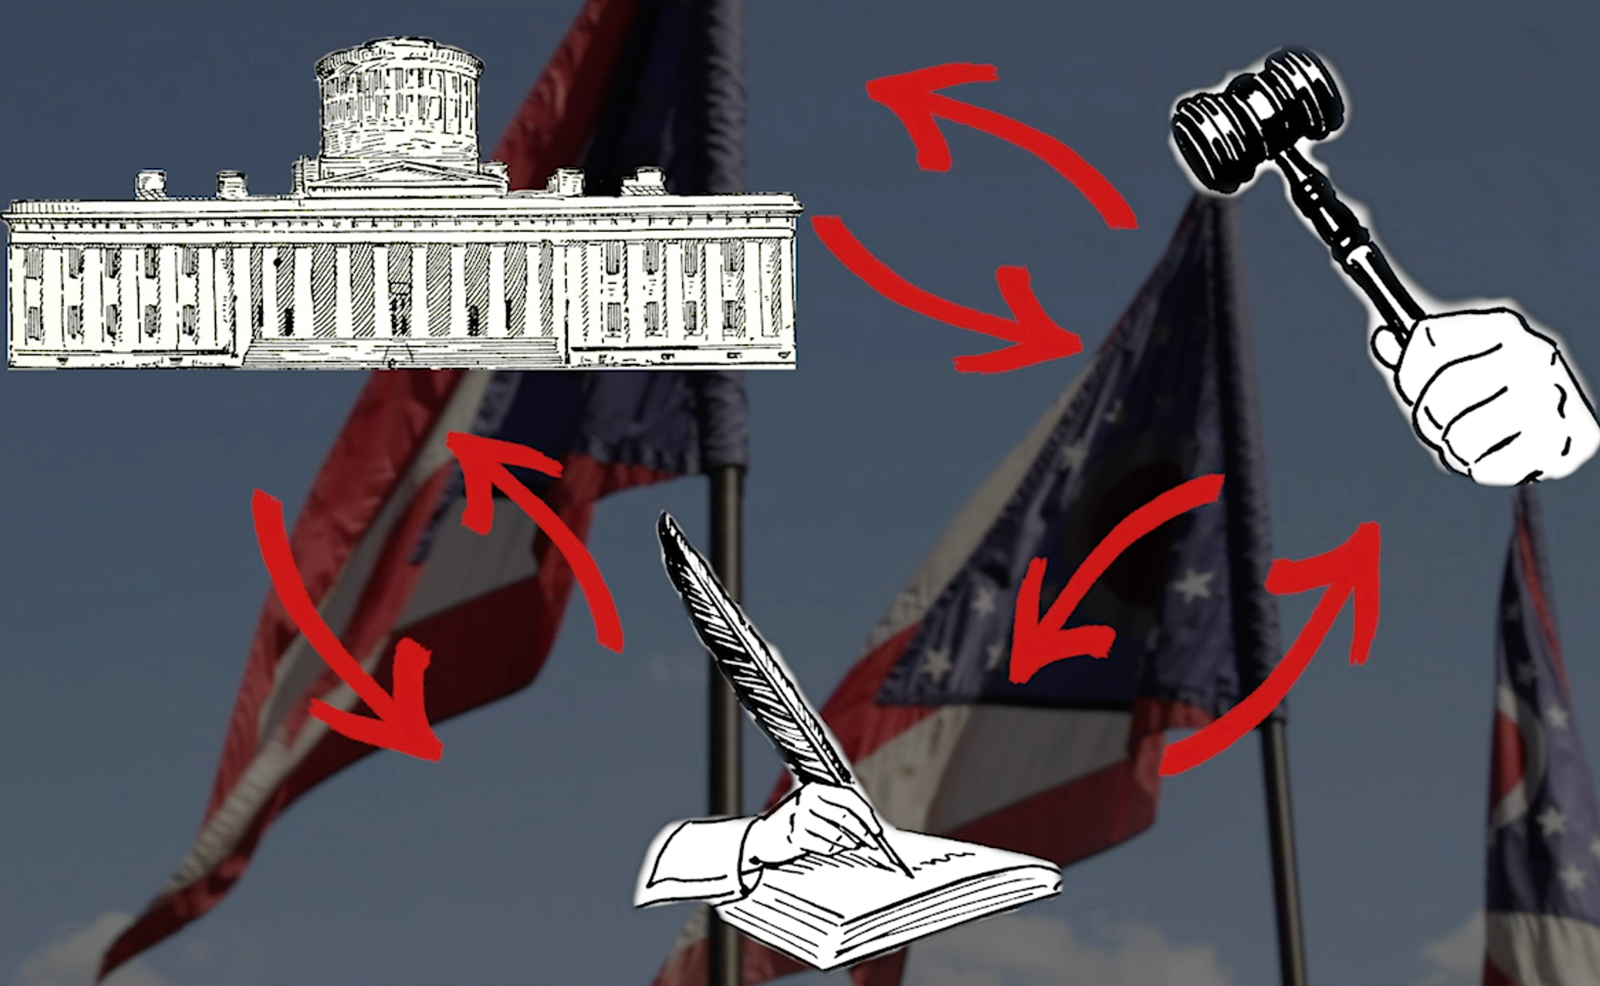 Image of sketches of the Ohio Statehouse, a hand writing in a book using a quill pen, and a hand holding a gavel with several Ohio flags in the background